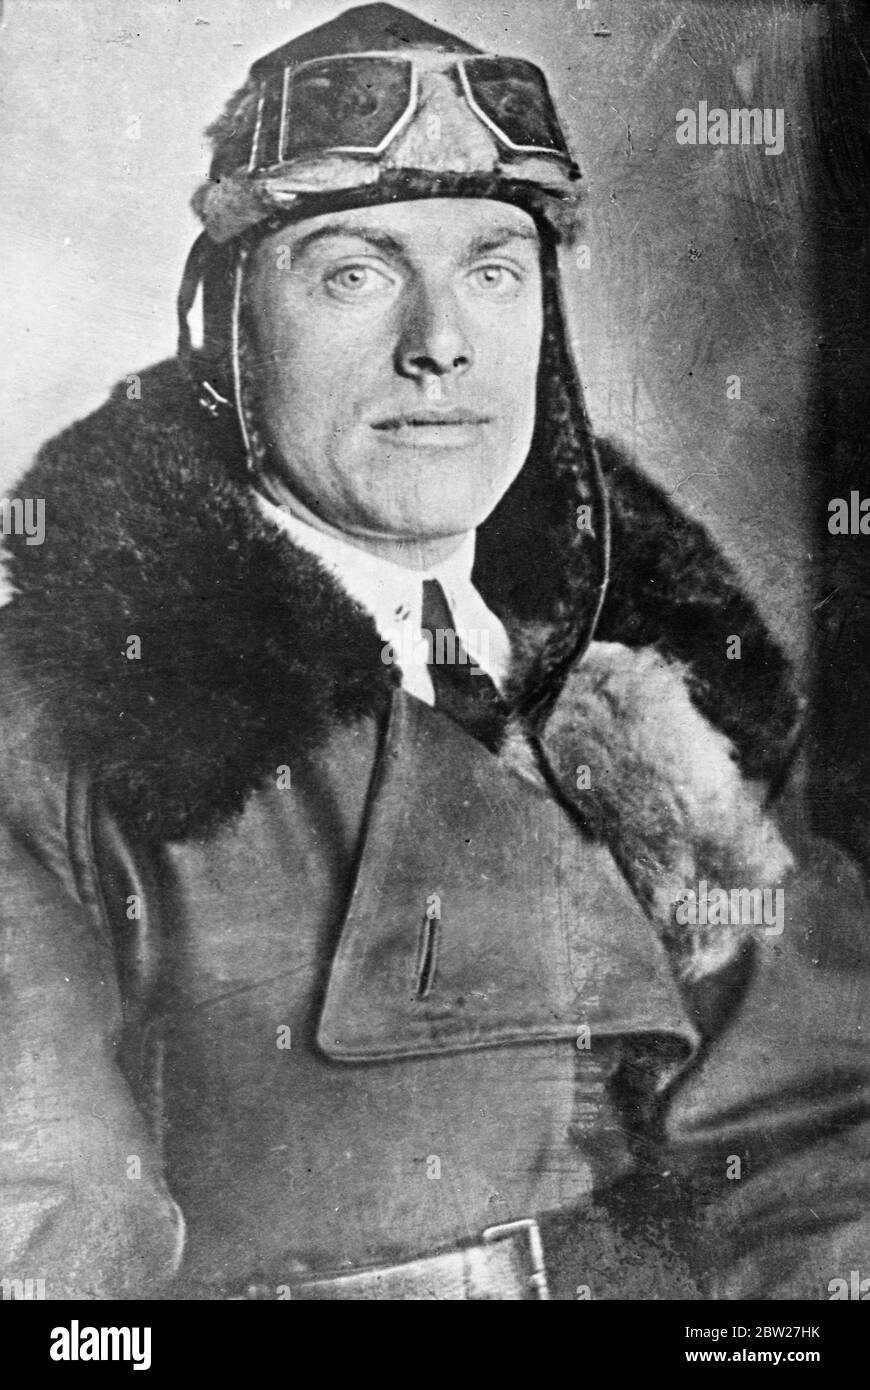 Major Andrei Borisevich Yumashev a crew member on the Moscow - San Francisco flight along chief pilot Mikhail Mikhailovich Gromov. Mr Gromov, Soviet Polar flyer, and his two companions Major Yumashev, and Danilin, were expected to arrive at San Francisco this morning (Wednesday) after their record-breaking flight. 14 July 1937 Stock Photo